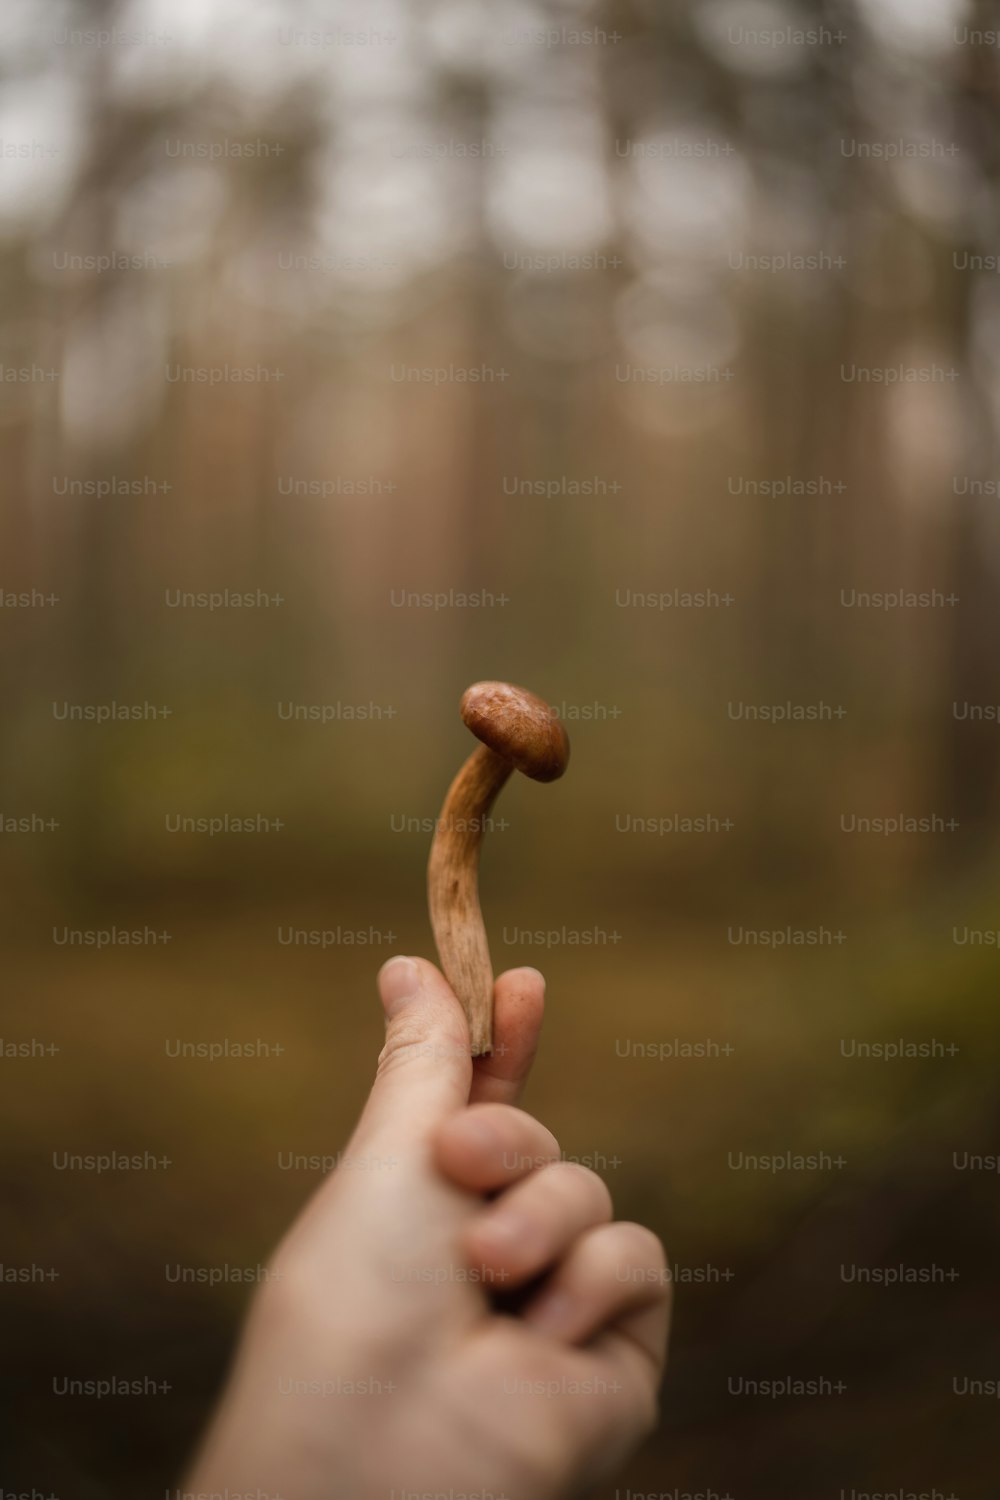 a person holding a piece of food in their hand